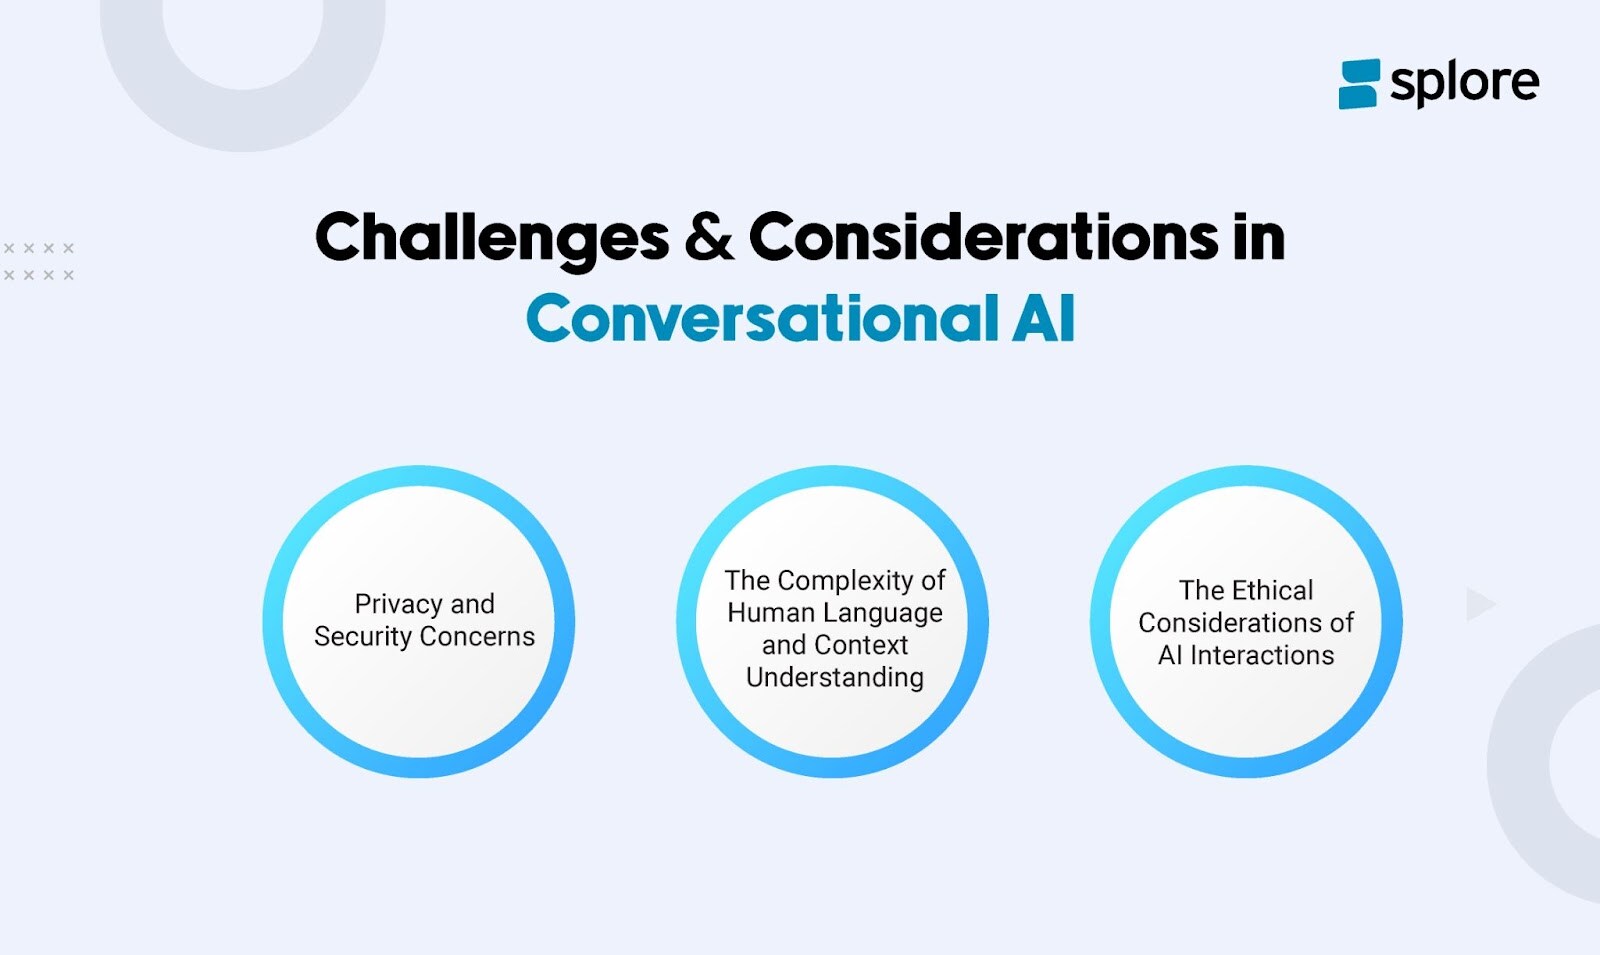 Challenges & Considerations in Conversational AI